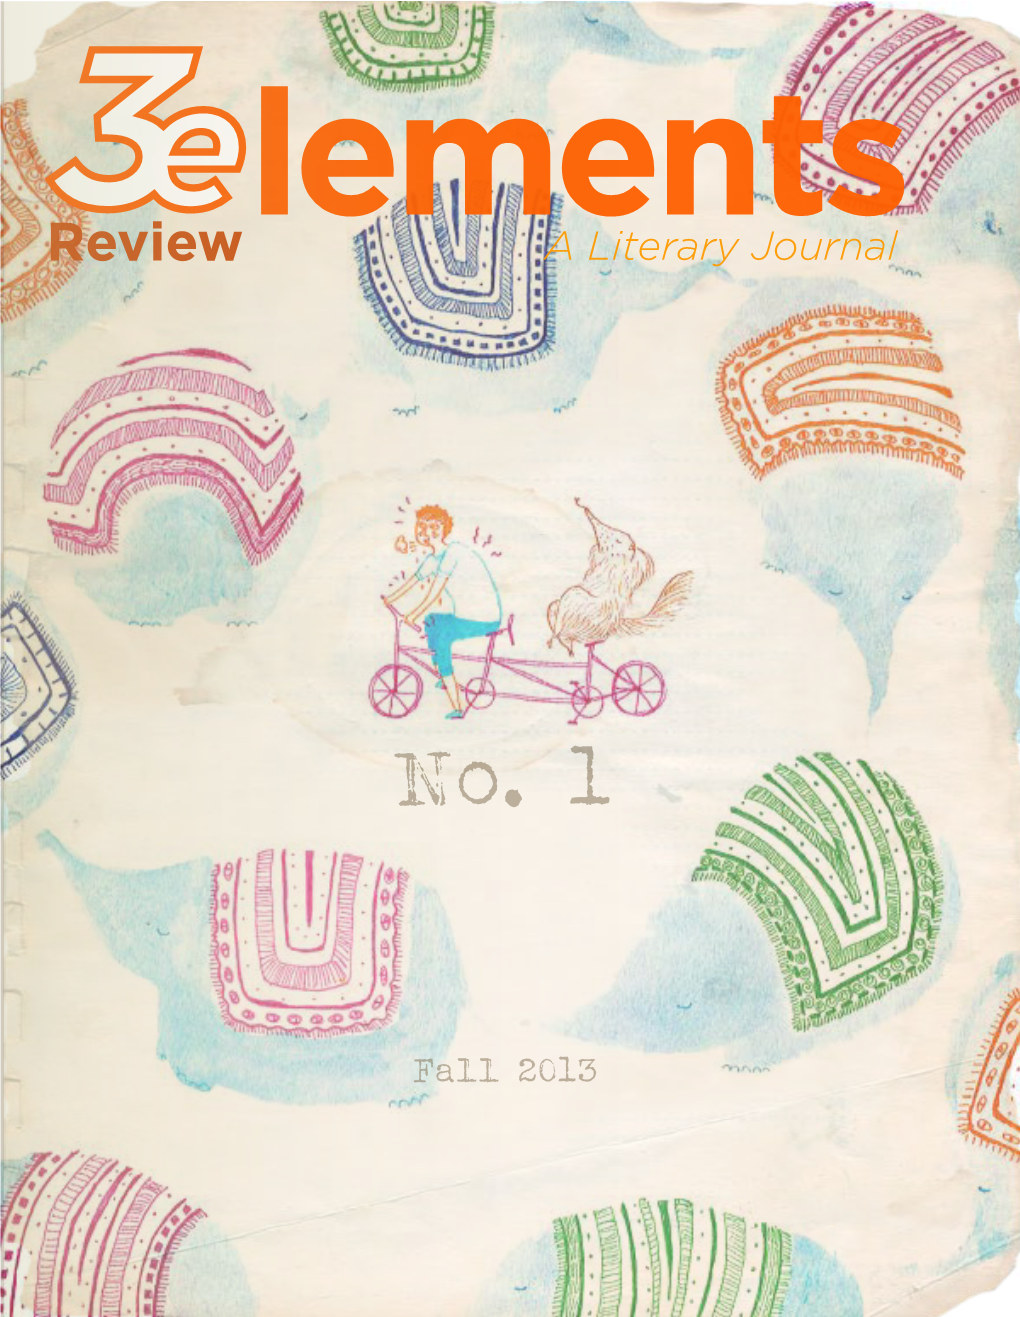 3Elements Review – Fall Journal 2013